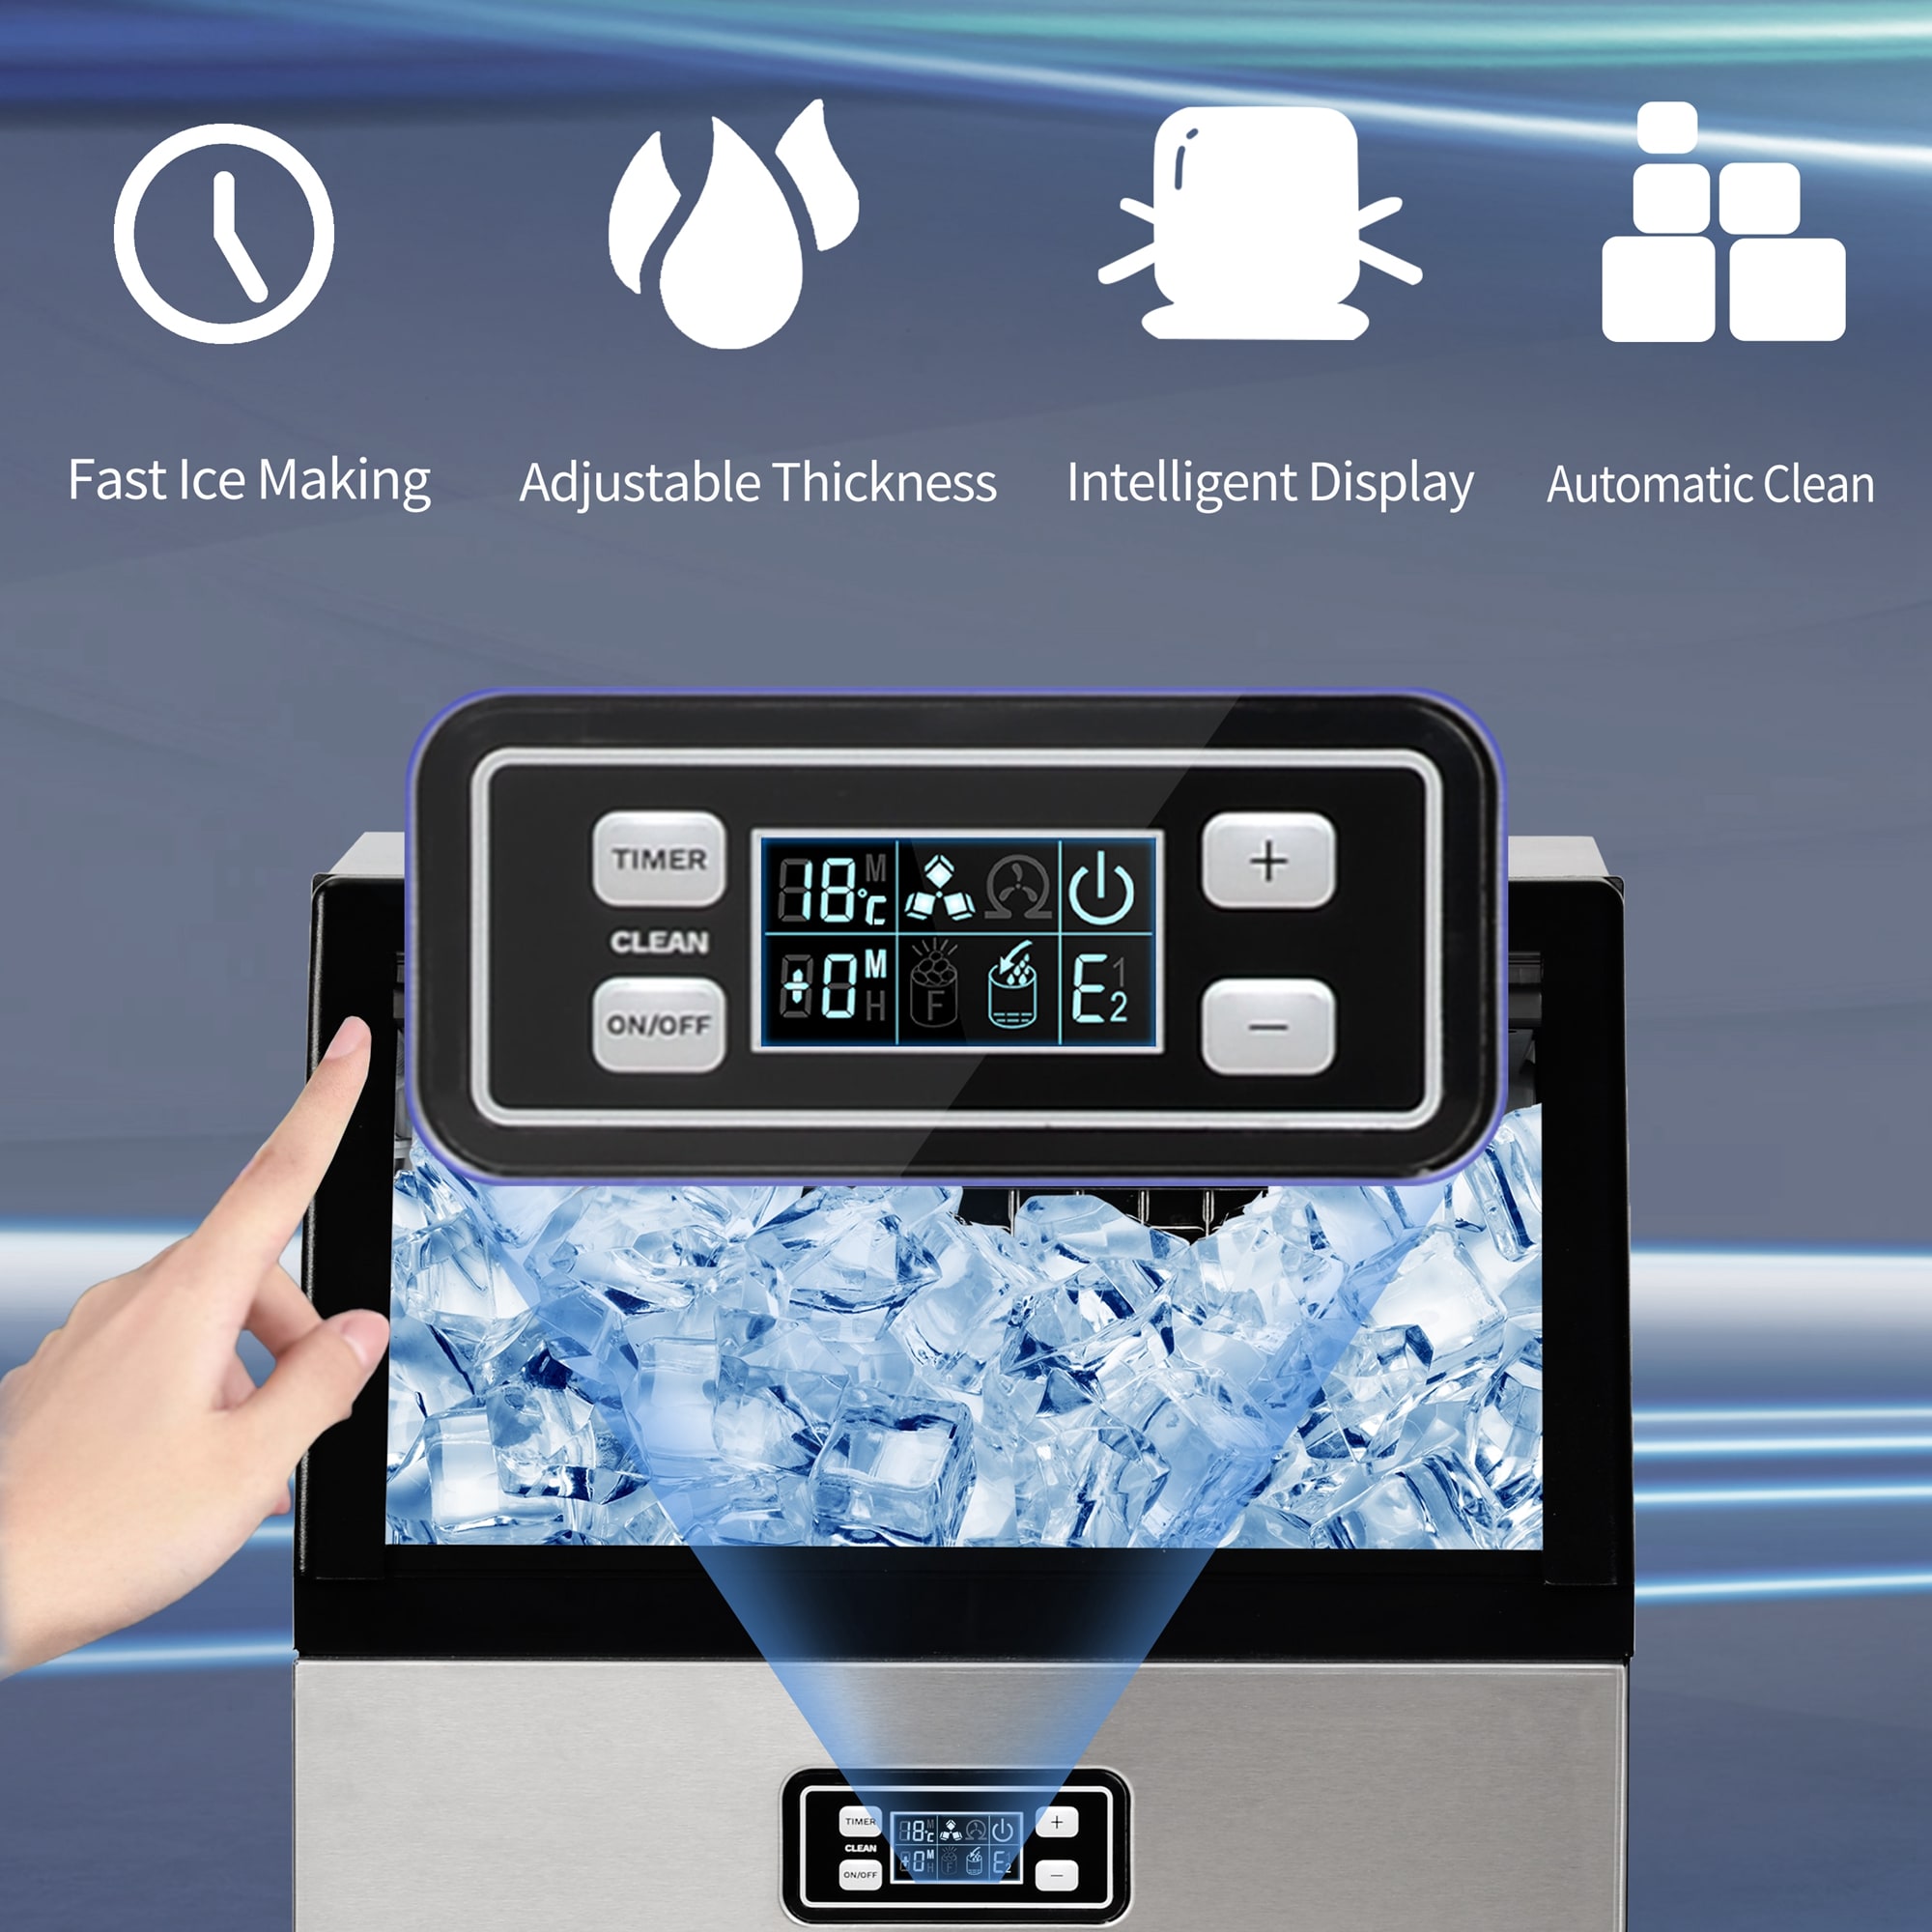 Need Help*] About to drop some serious cash on an ice maker and